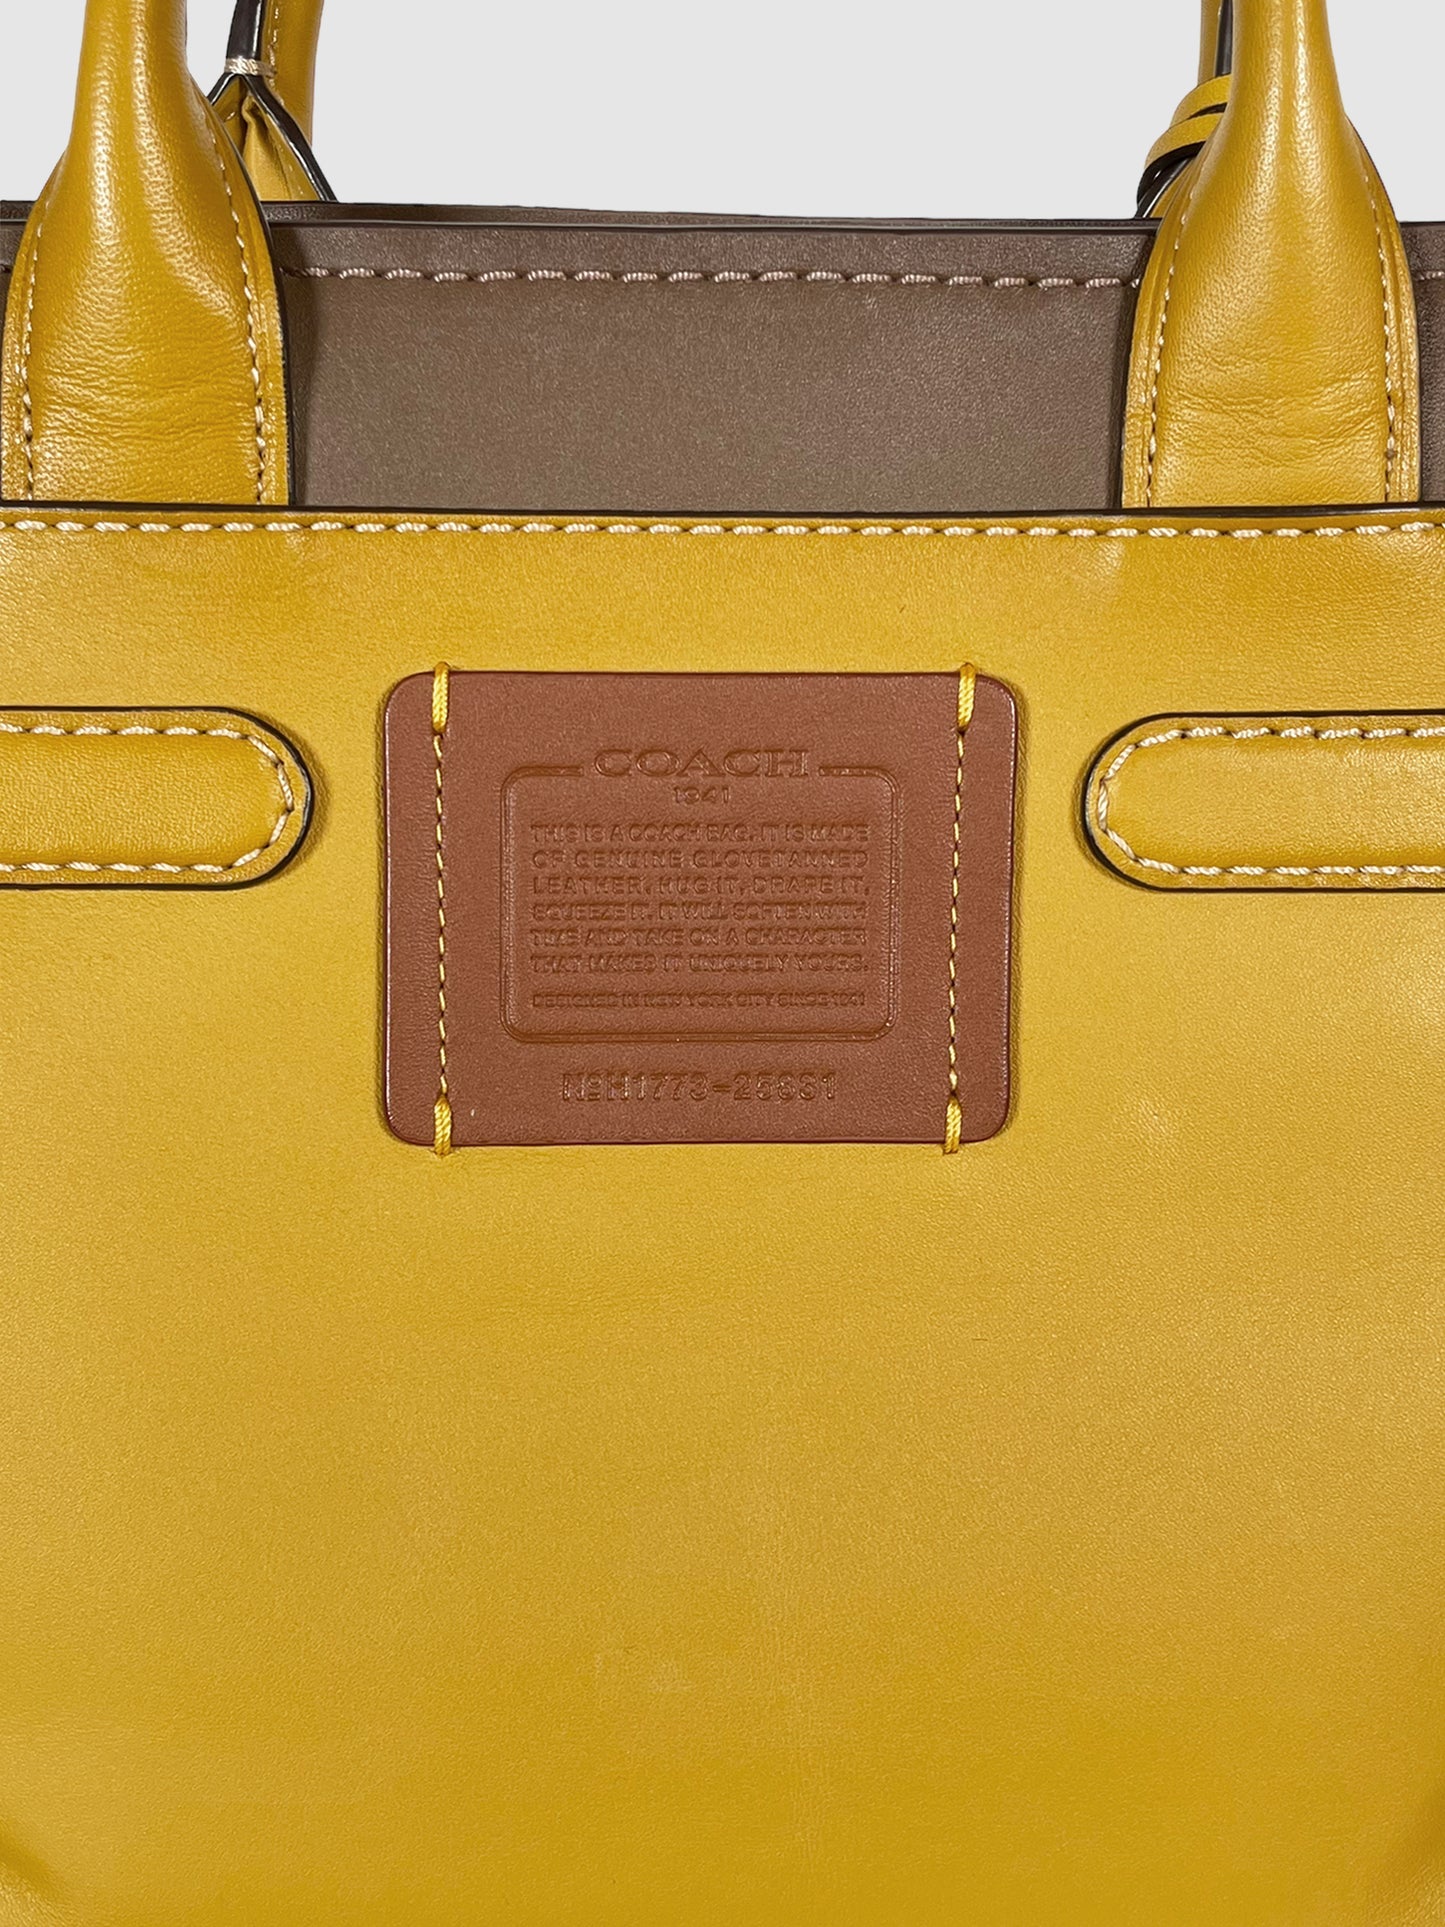 Coach 1941 Swagger Colorblock Leather Bag